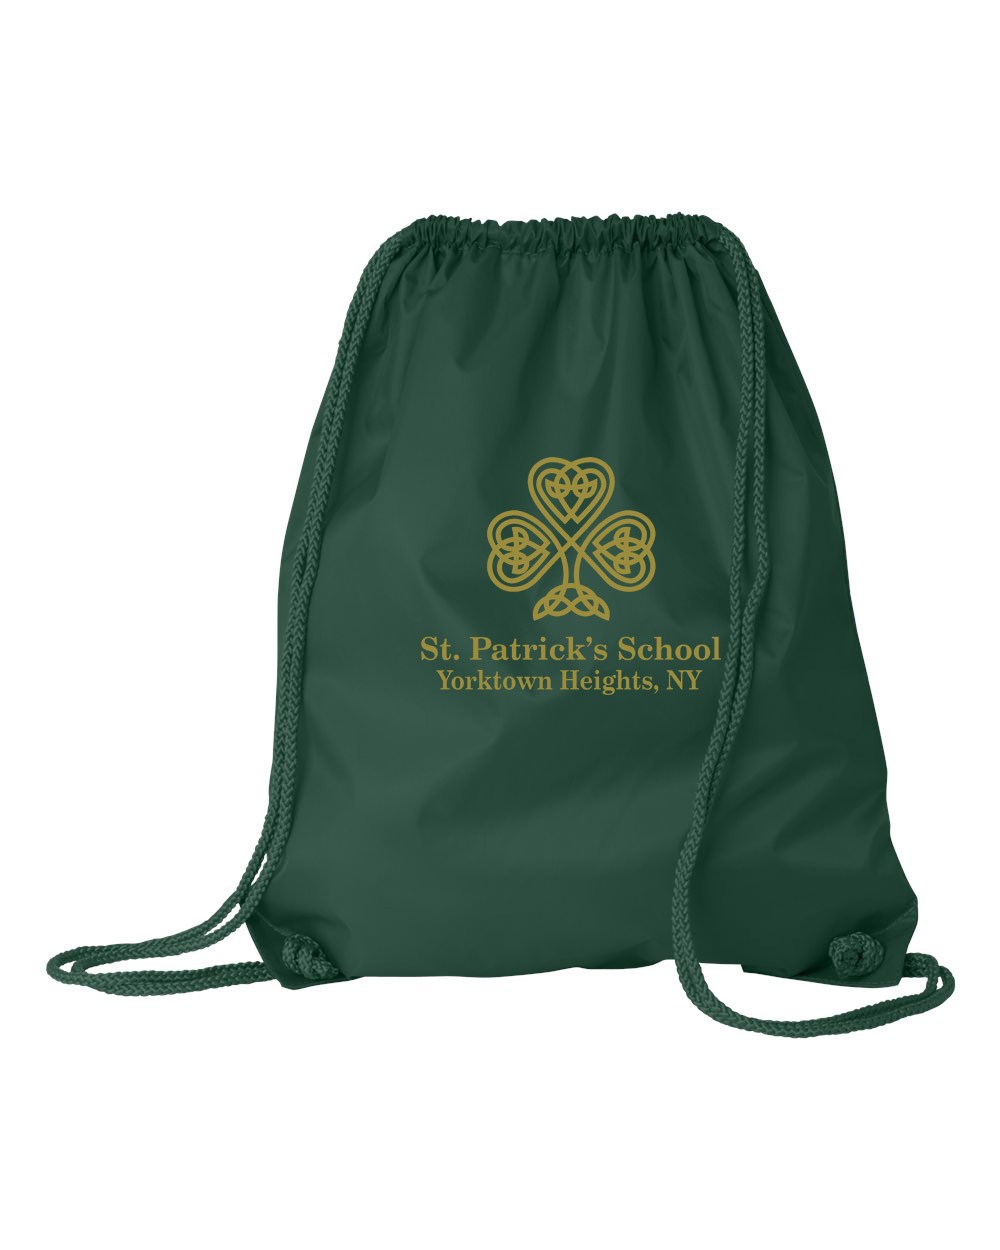 SPS Cinch Bag w/ Logo - Please Allow 2-3 Weeks for Delivery